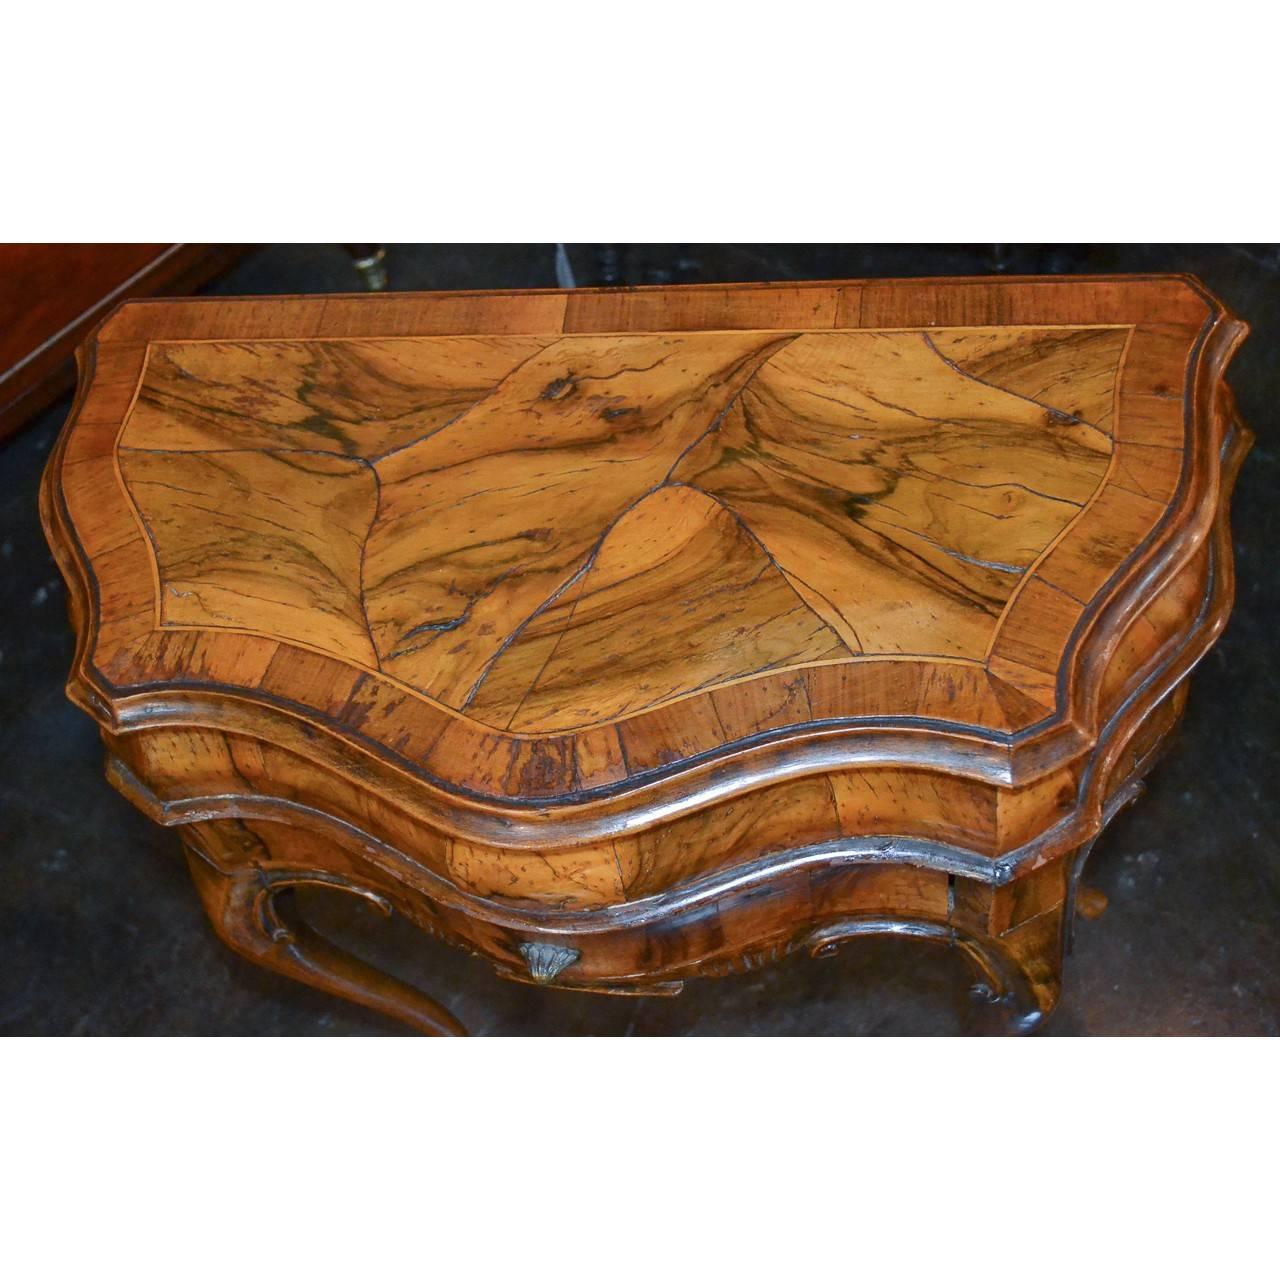 Early 20th century Italian burl walnut serpentine-shaped side table or commode with a single drawer. The top lifts to reveal an open compartment. The whole on very graceful and sleek cabriole legs,

circa 1920.